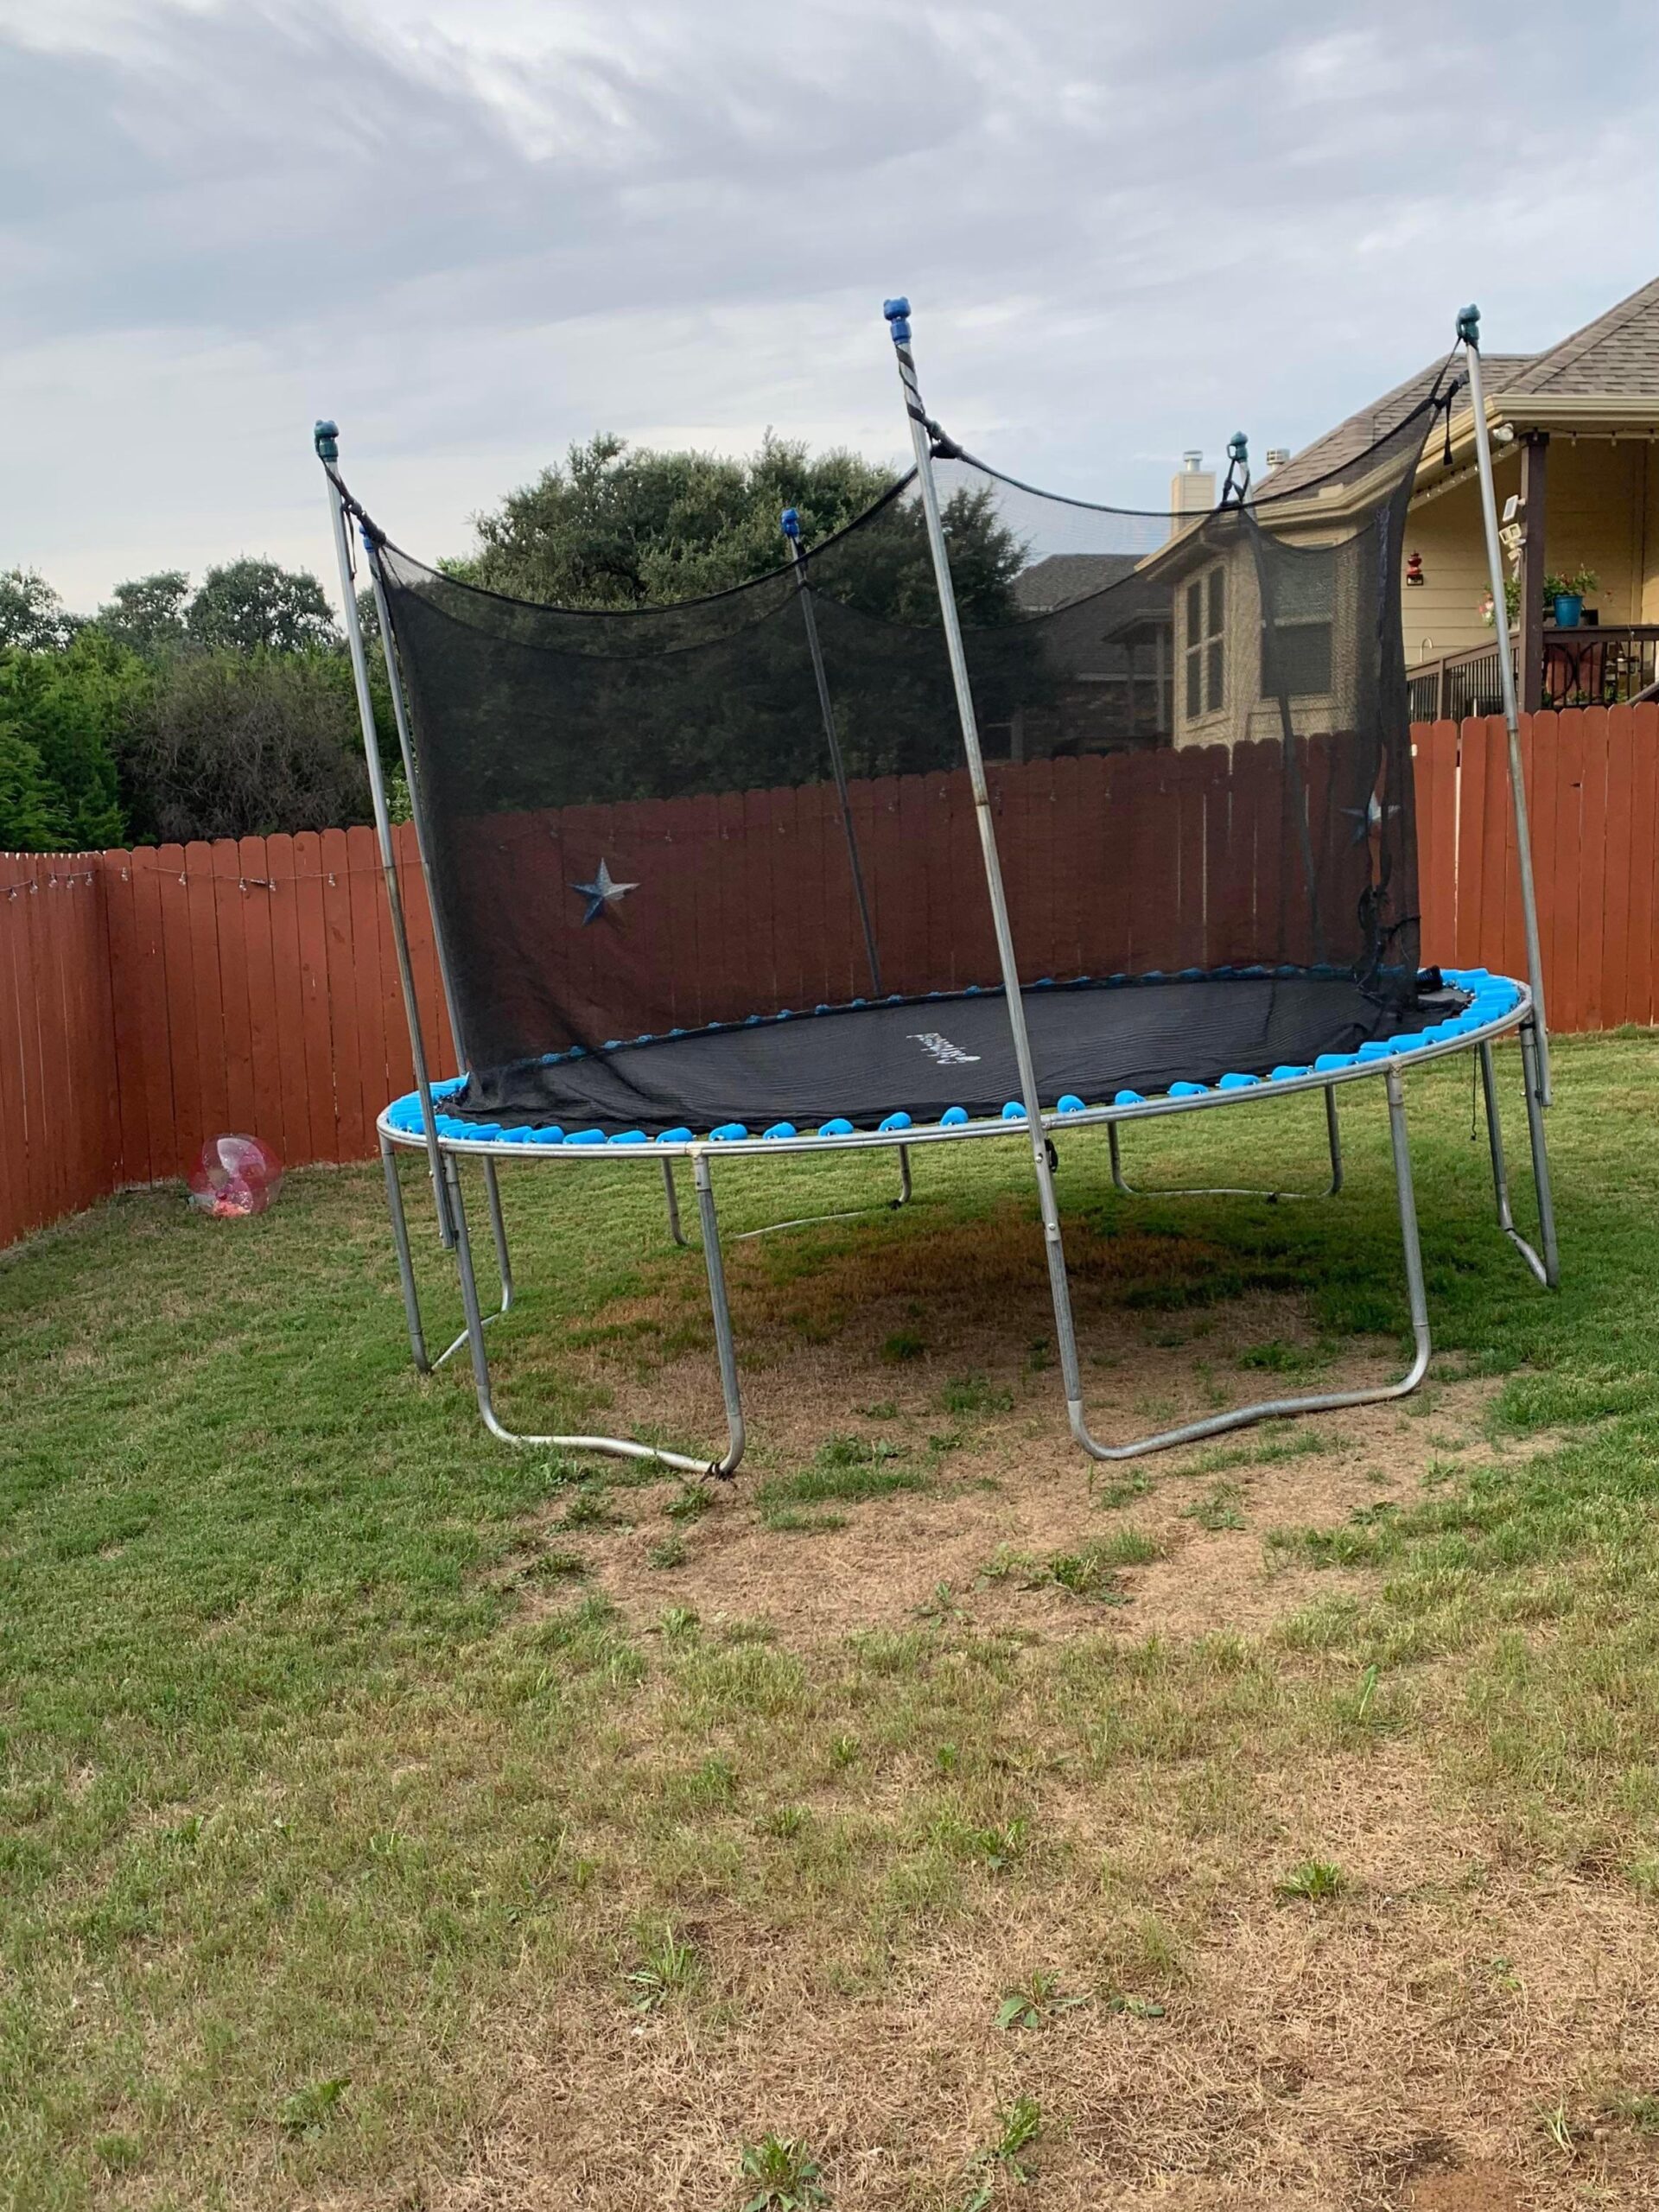 Does The Ground Need To Be Level For A Trampoline